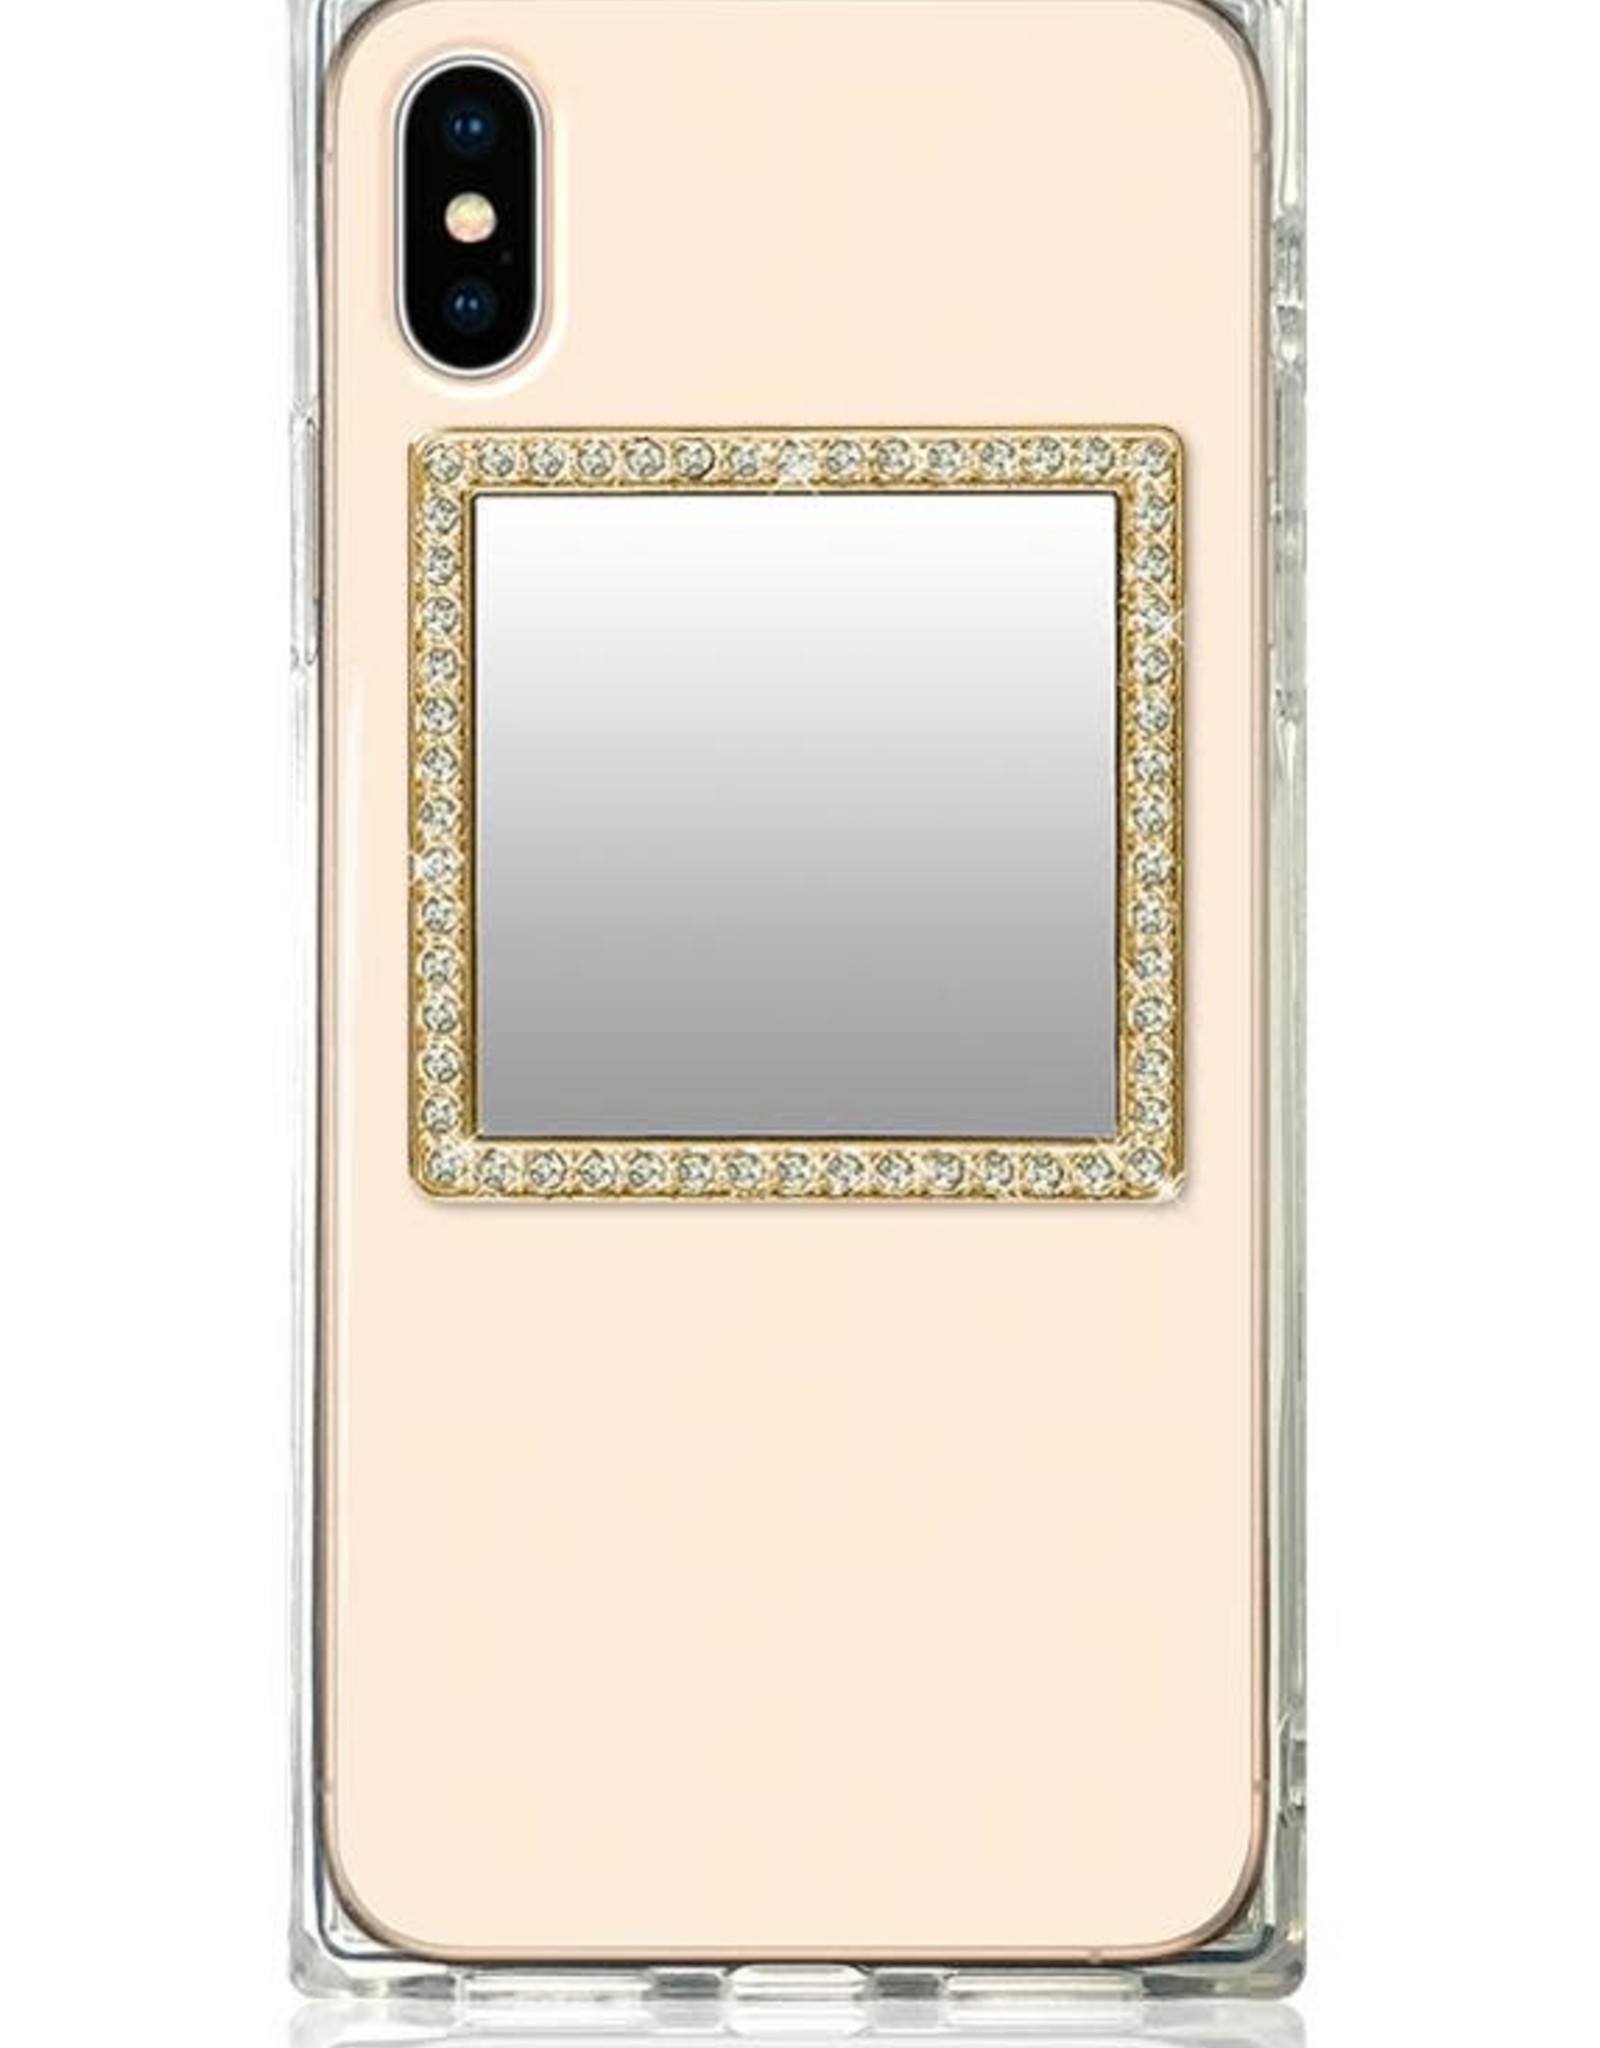 iDecoz Square Tech Mirror - Gold/Clear Crystals